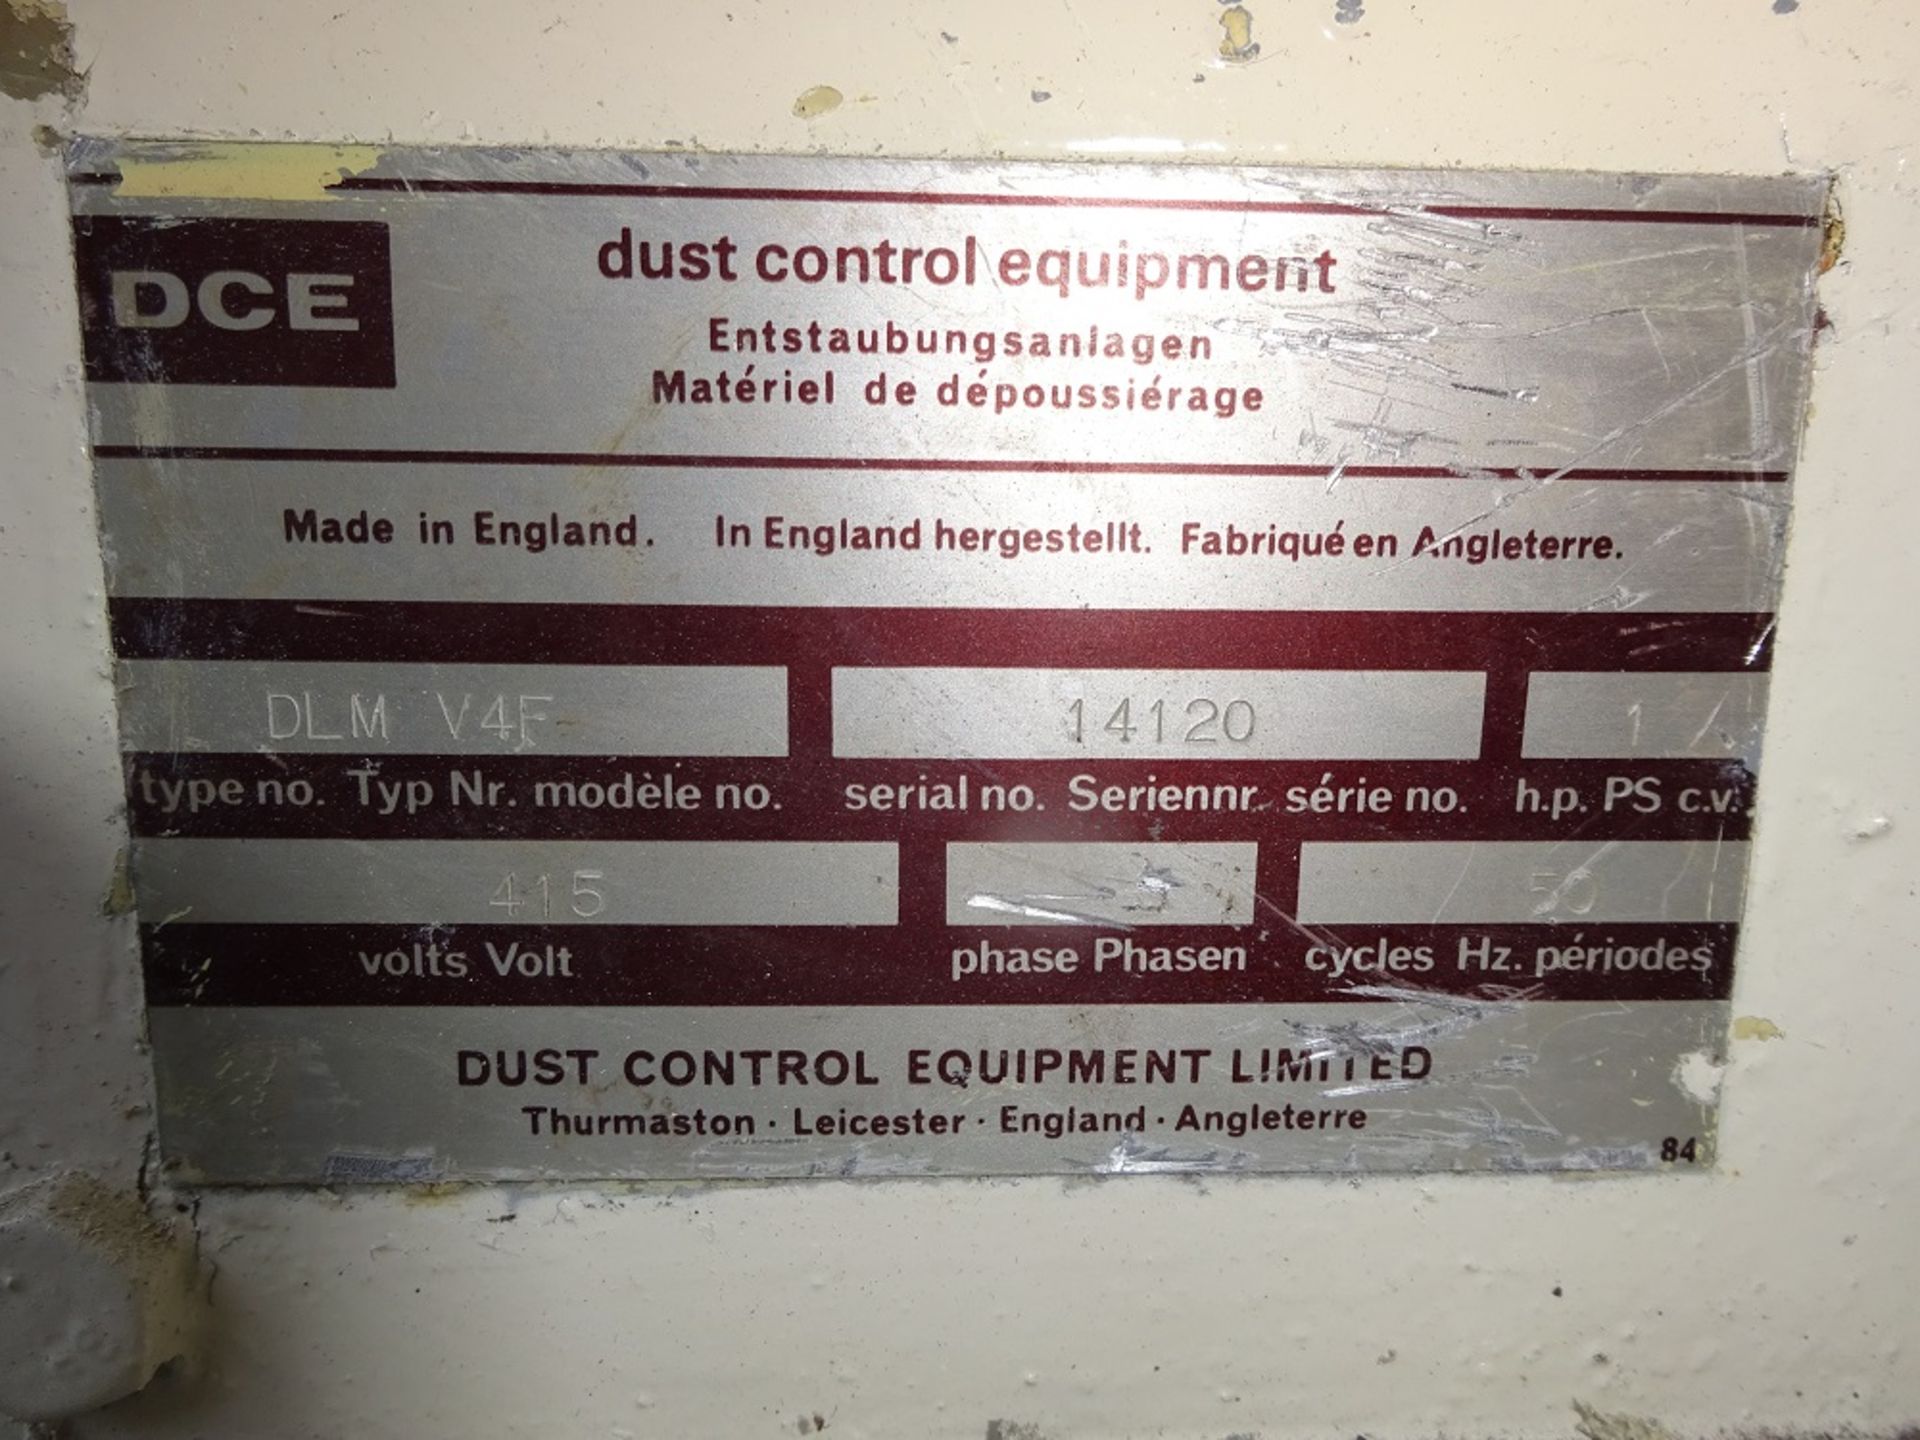 DCE Dalamatic reversejet filter model DLM V4F with 0.75kw fan. Lot located Gloucester. Free - Image 2 of 4